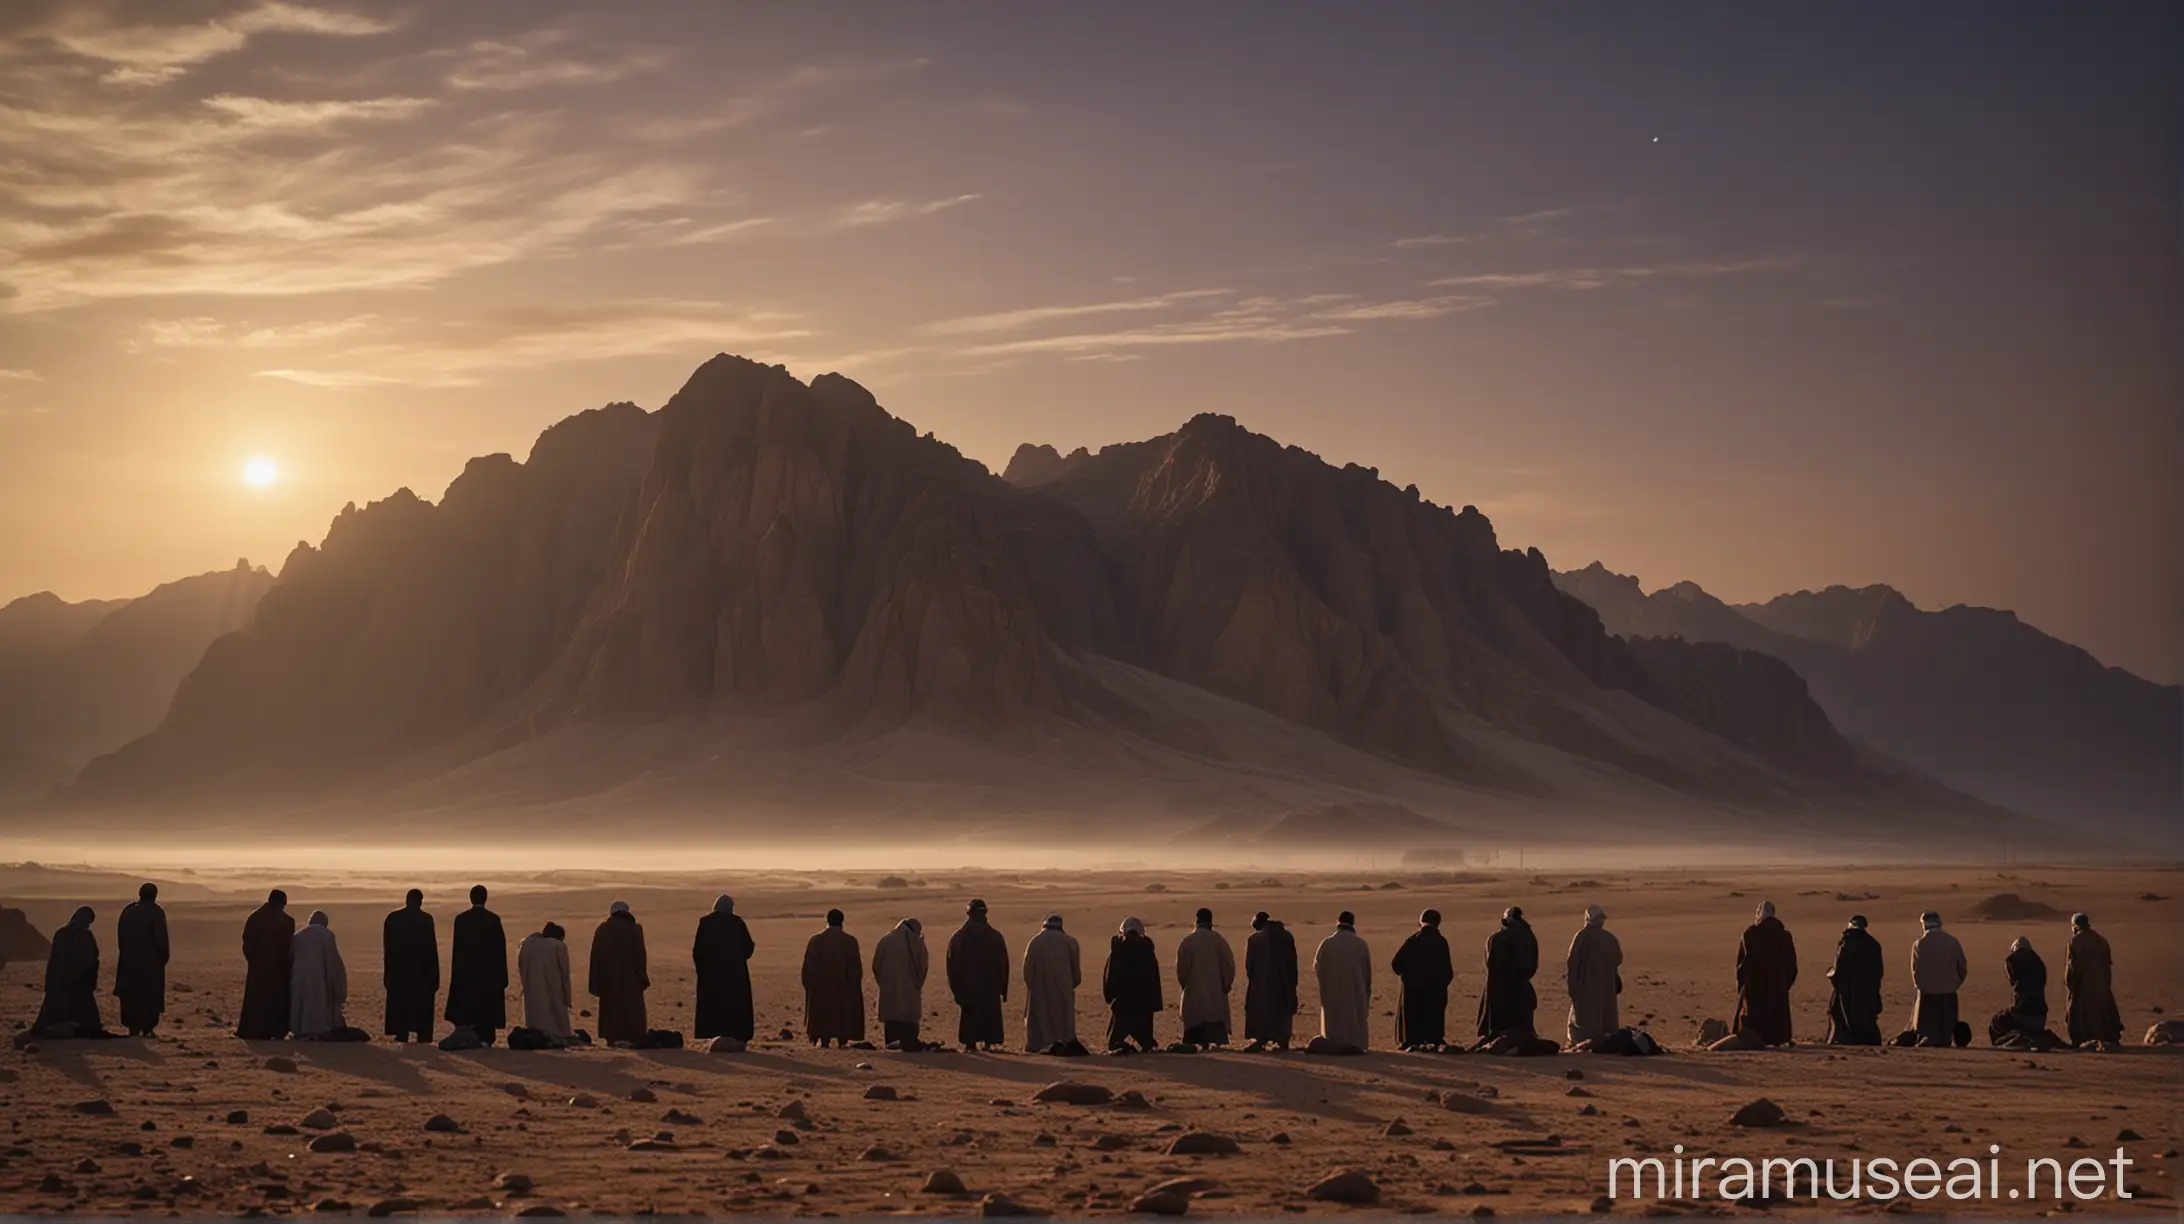 Dramatic Desert Landscape with Defiant Figure and Group Prayer